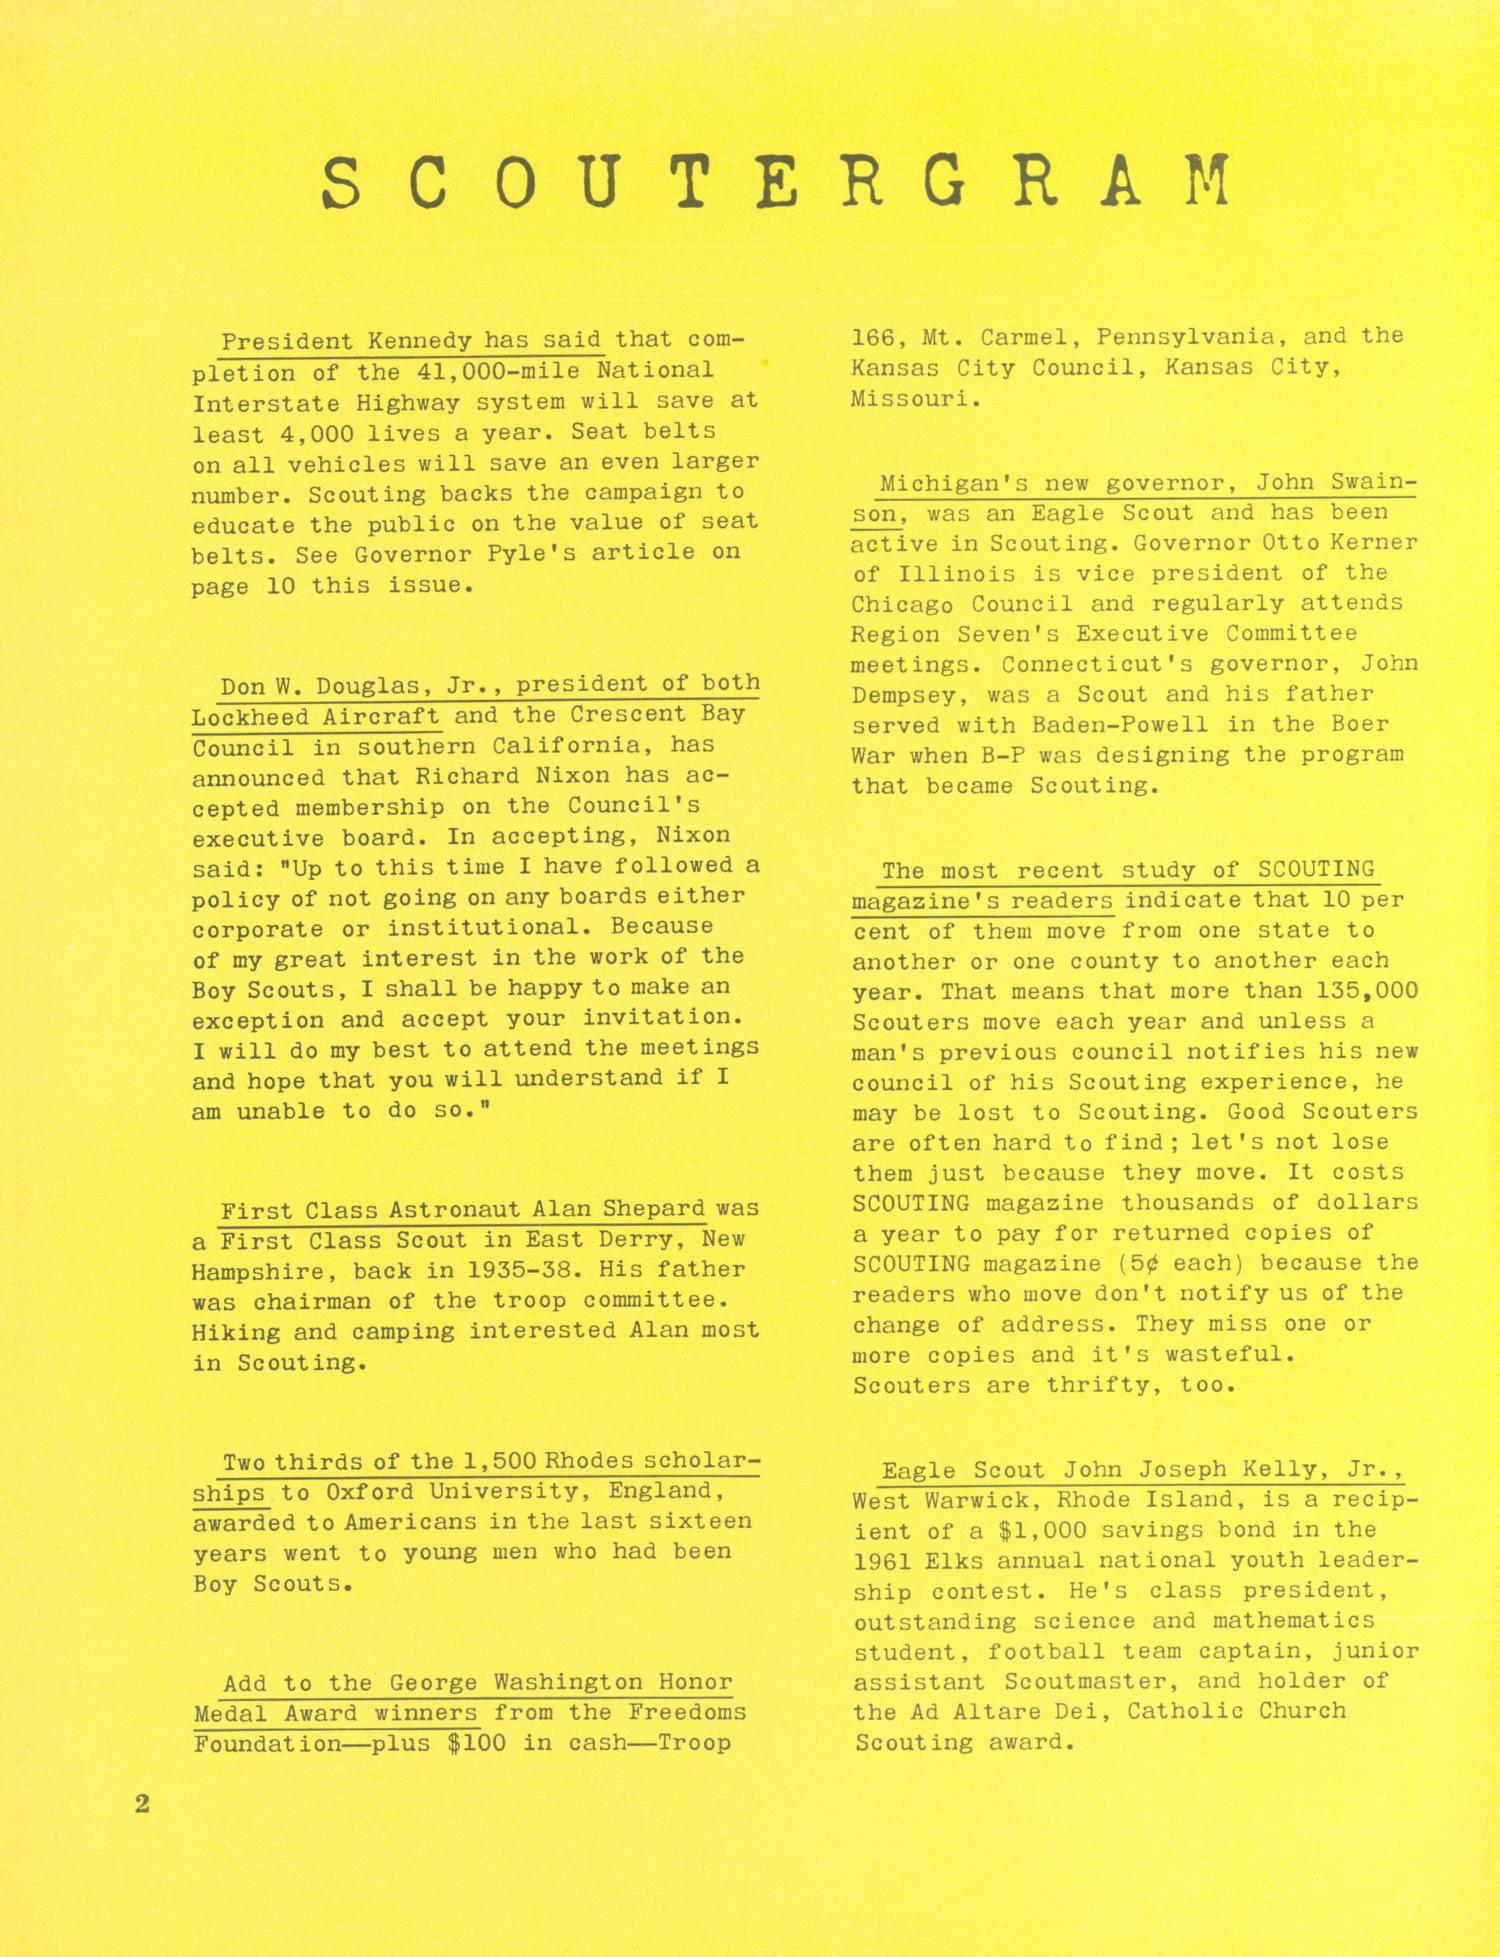 Scouting, Volume 49, Number 6, July-August 1961
                                                
                                                    2
                                                